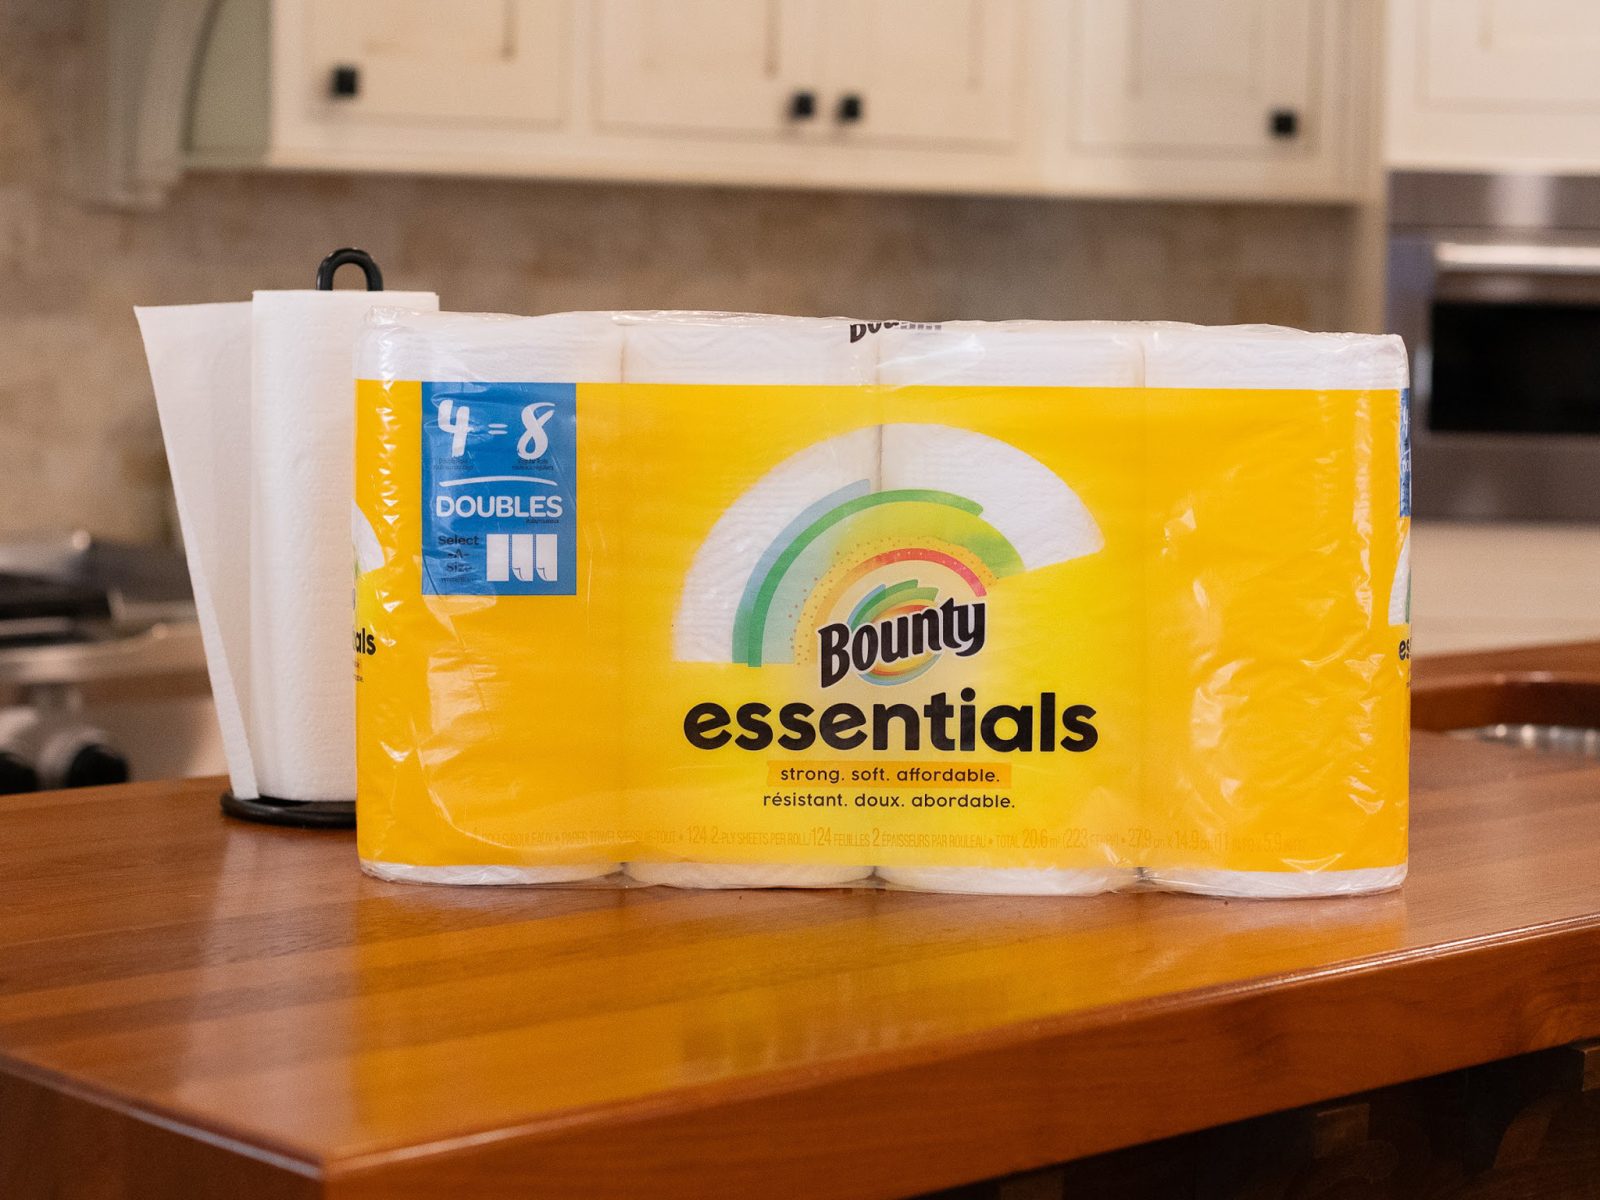 Get Bounty Essentials Paper Towels For As Low As $2.99 At Kroger